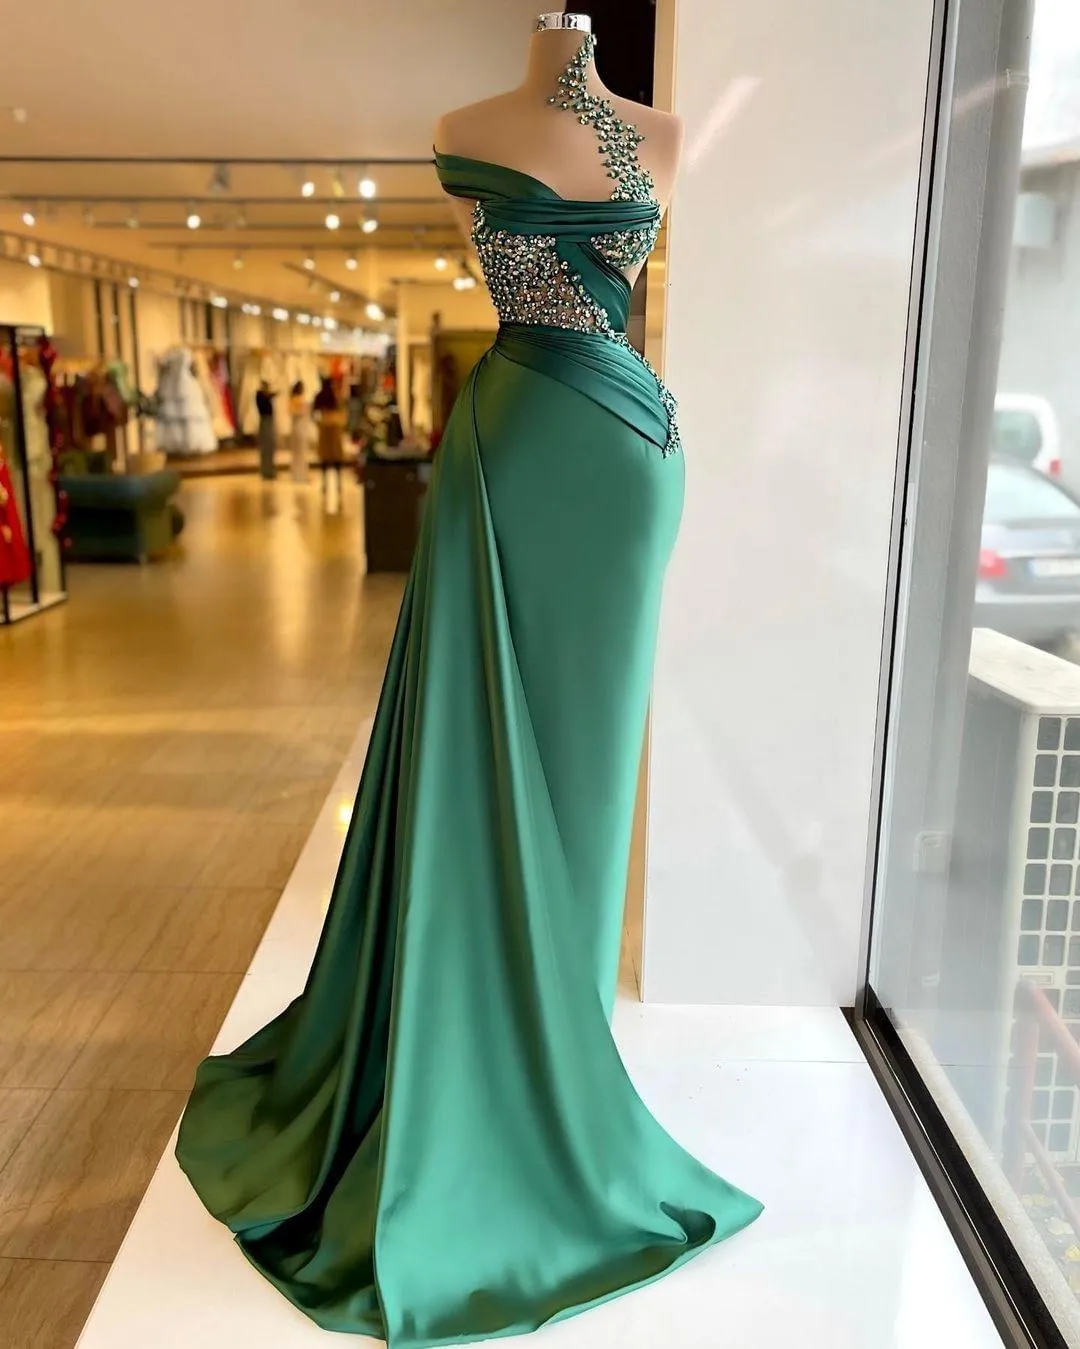 Fashion Mermaid Celebrity Evening Dresses High Neck Prom dresses Sequined Long Train Women Formal Floor Length Pageant Gowns